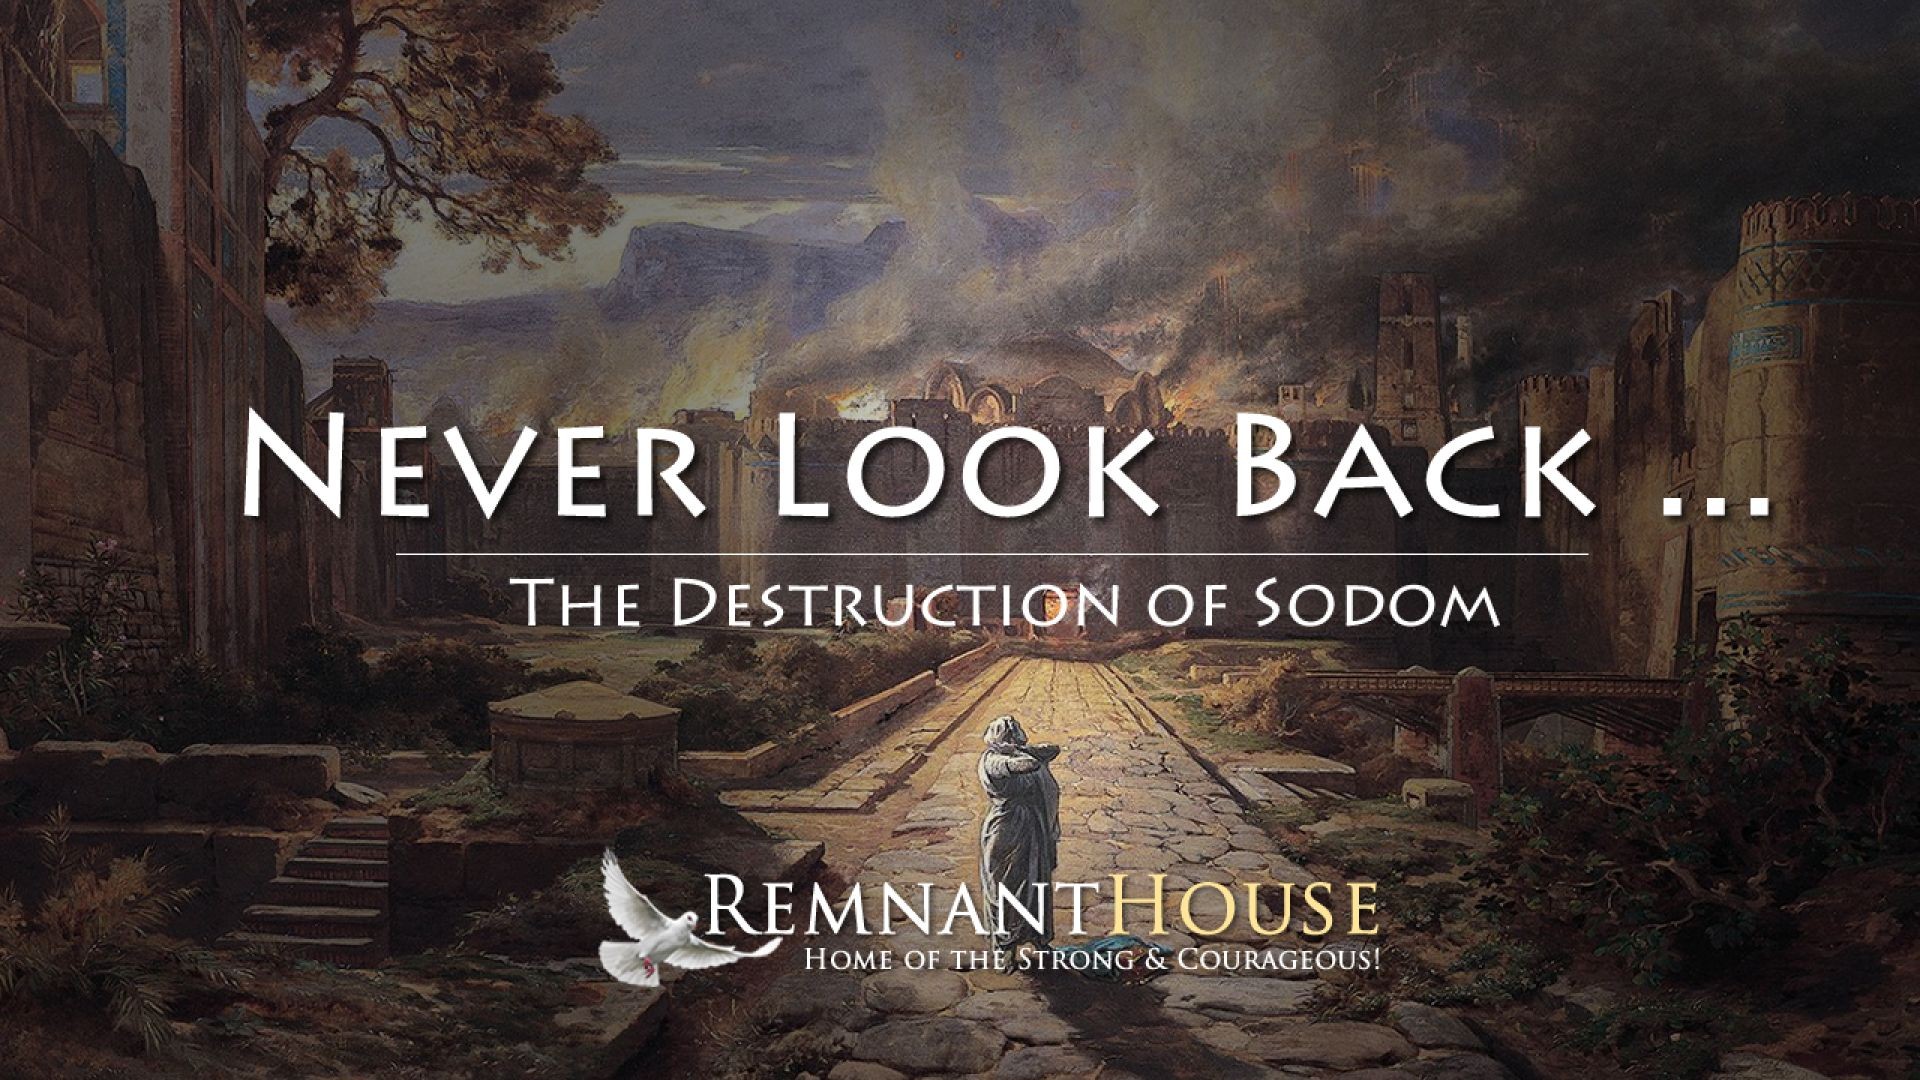 Never Look Back! The Destruction of Sodom!